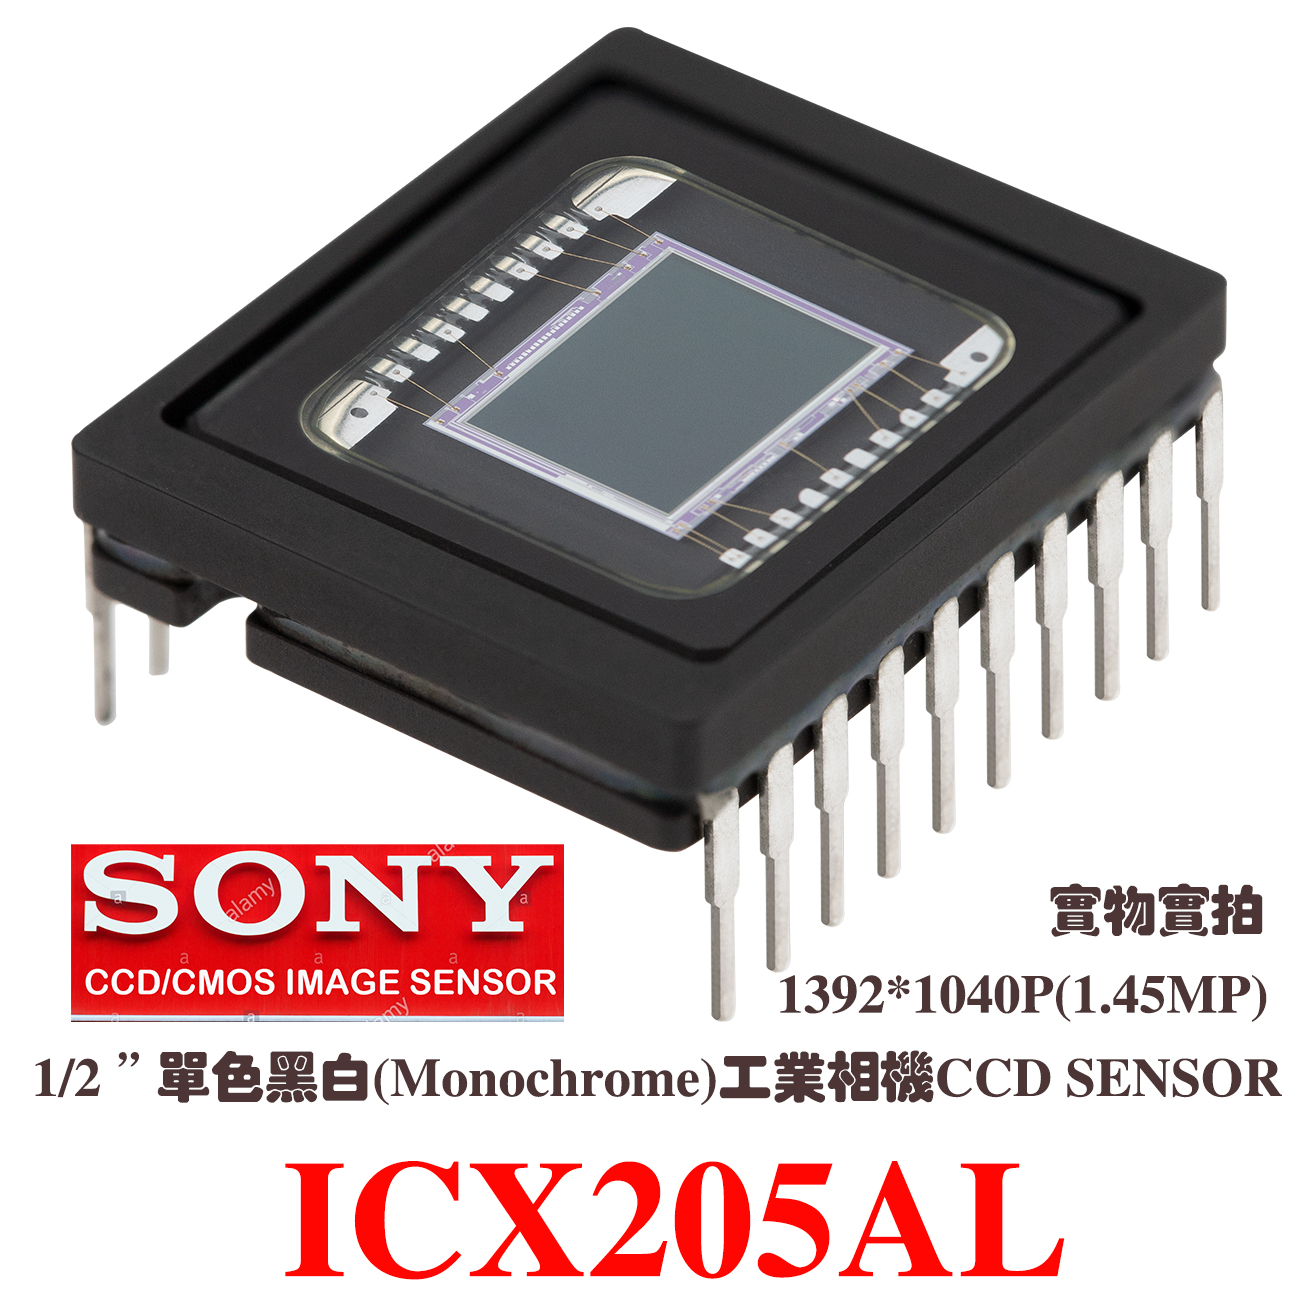 ICX205AL, SONY Diagonal 8mm CCD, (Type 1/2) 1.45MP, progressive scanning CCD, black and white industrial camera CCD, 1/2 inch SONY 1.45 megapixel, monochrome industrial camera, B/W image sensor